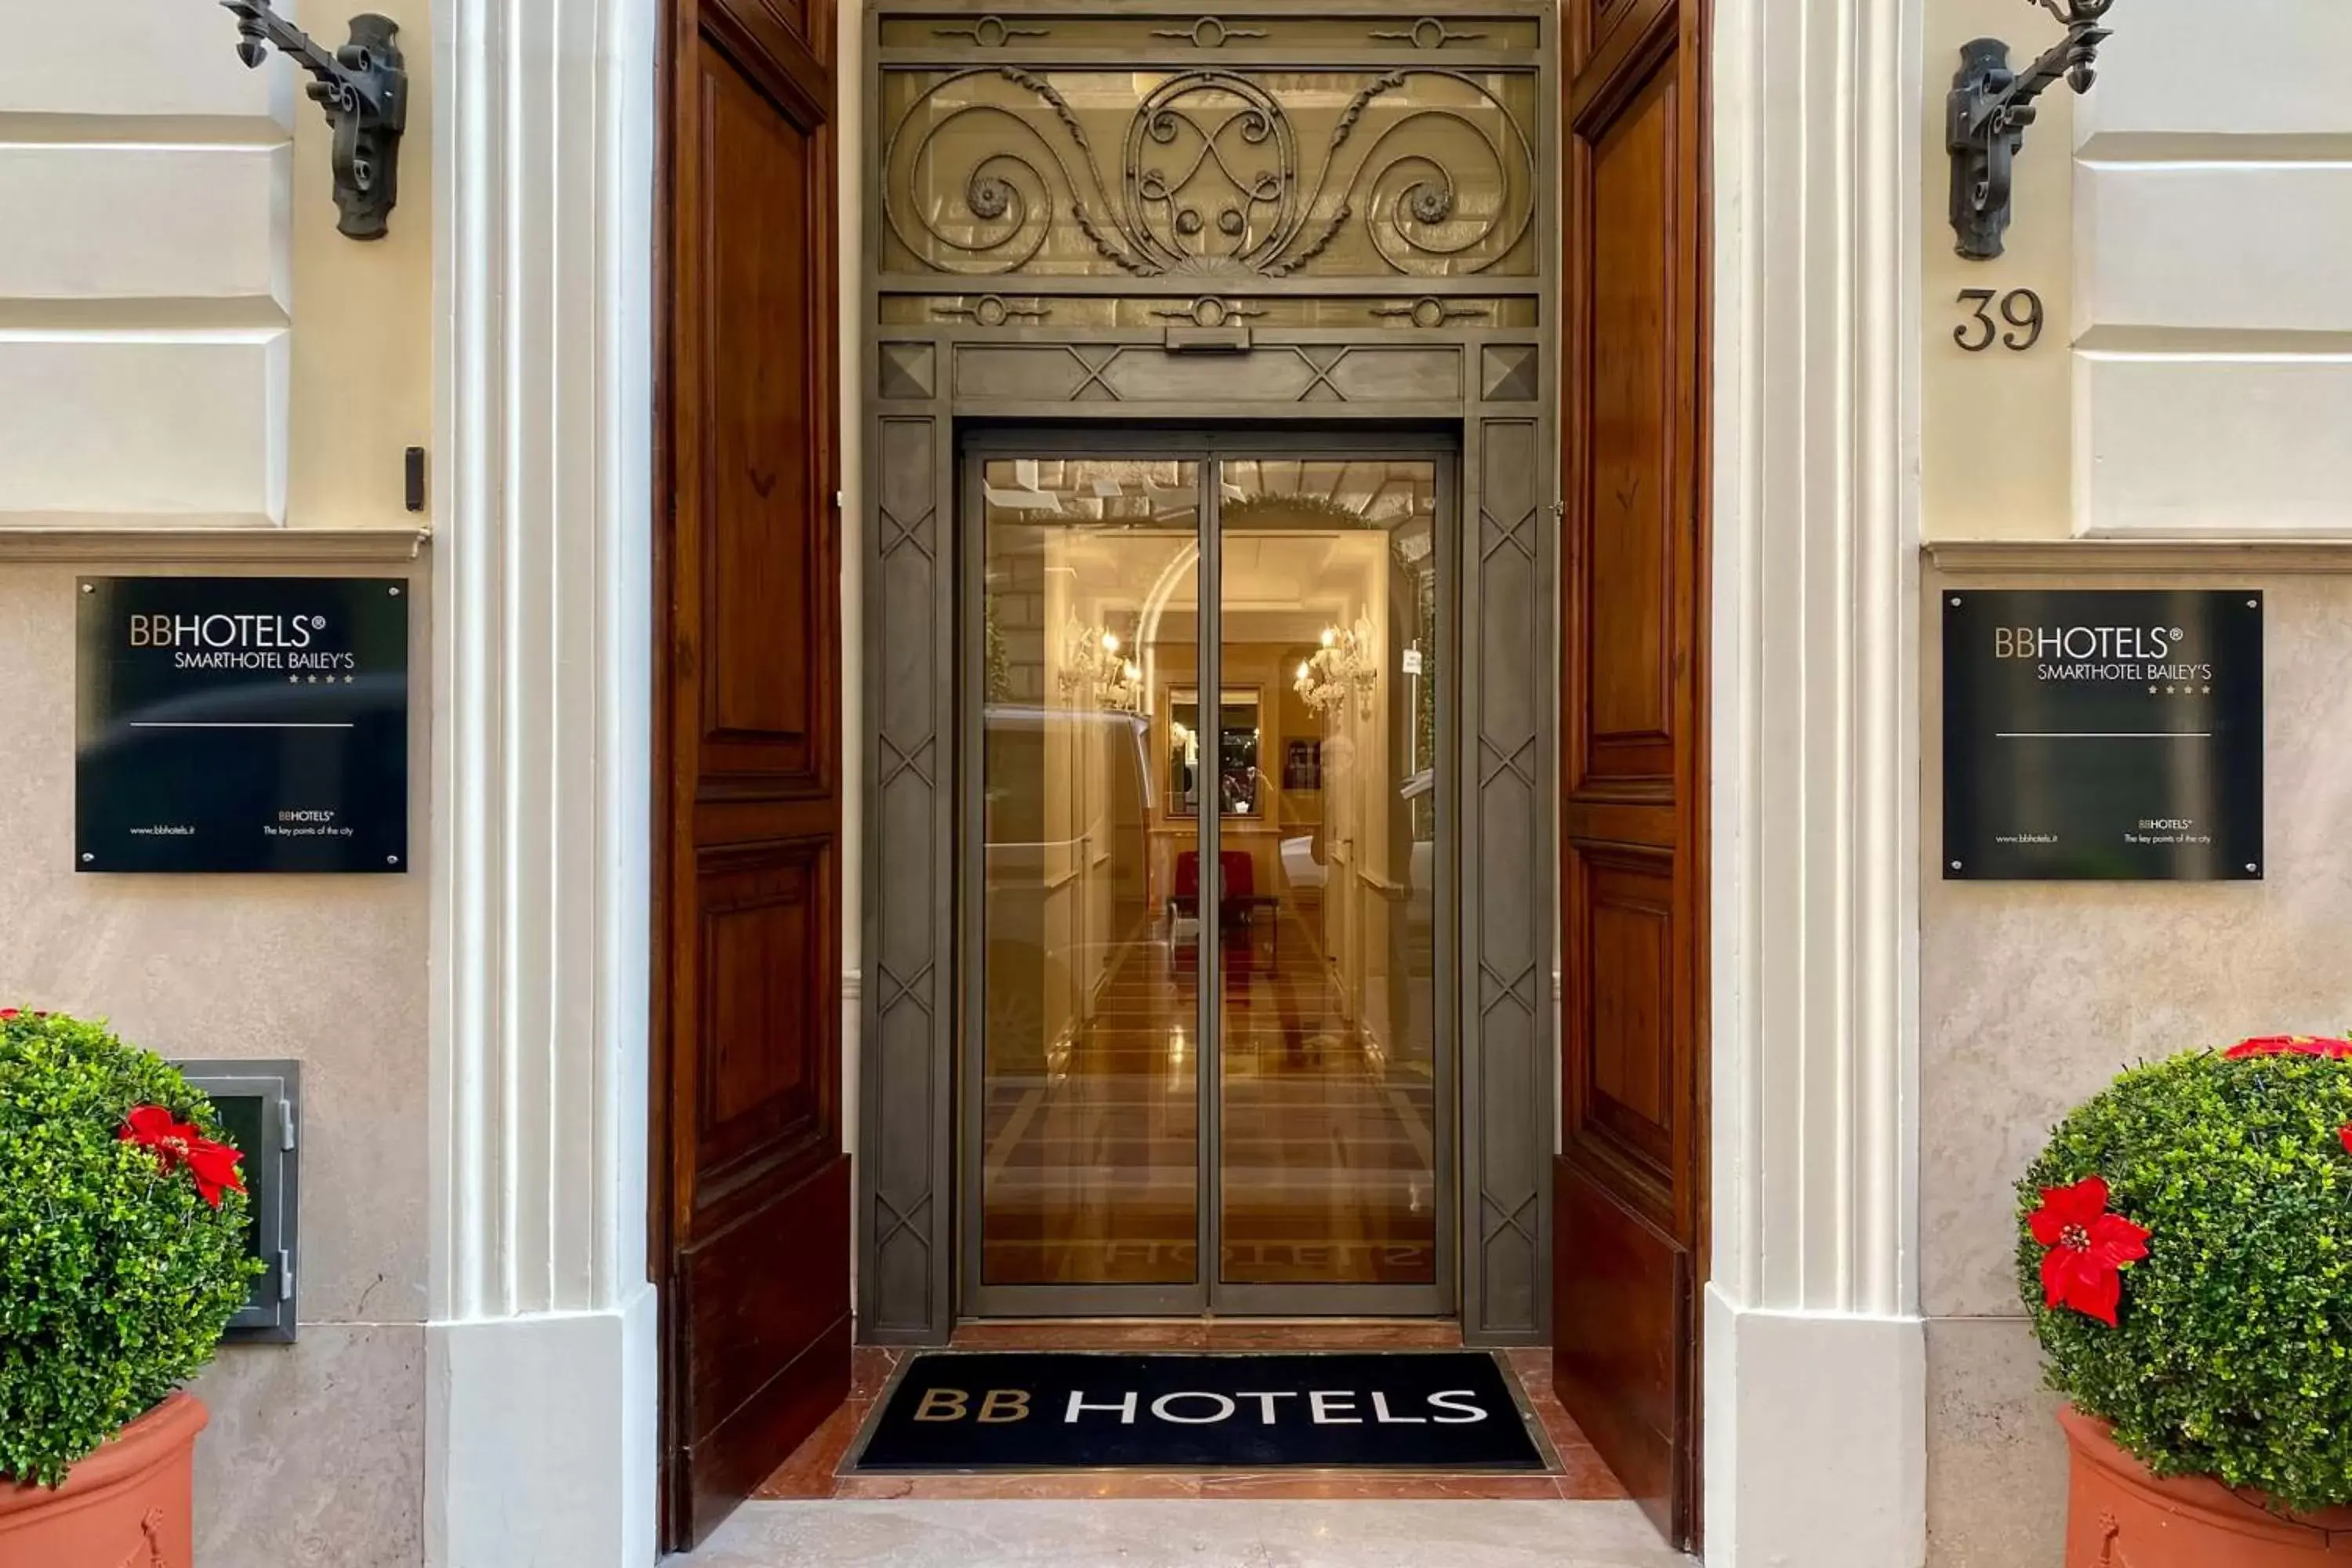 Property building, Facade/Entrance in BB Hotels Smarthotel Bailey's